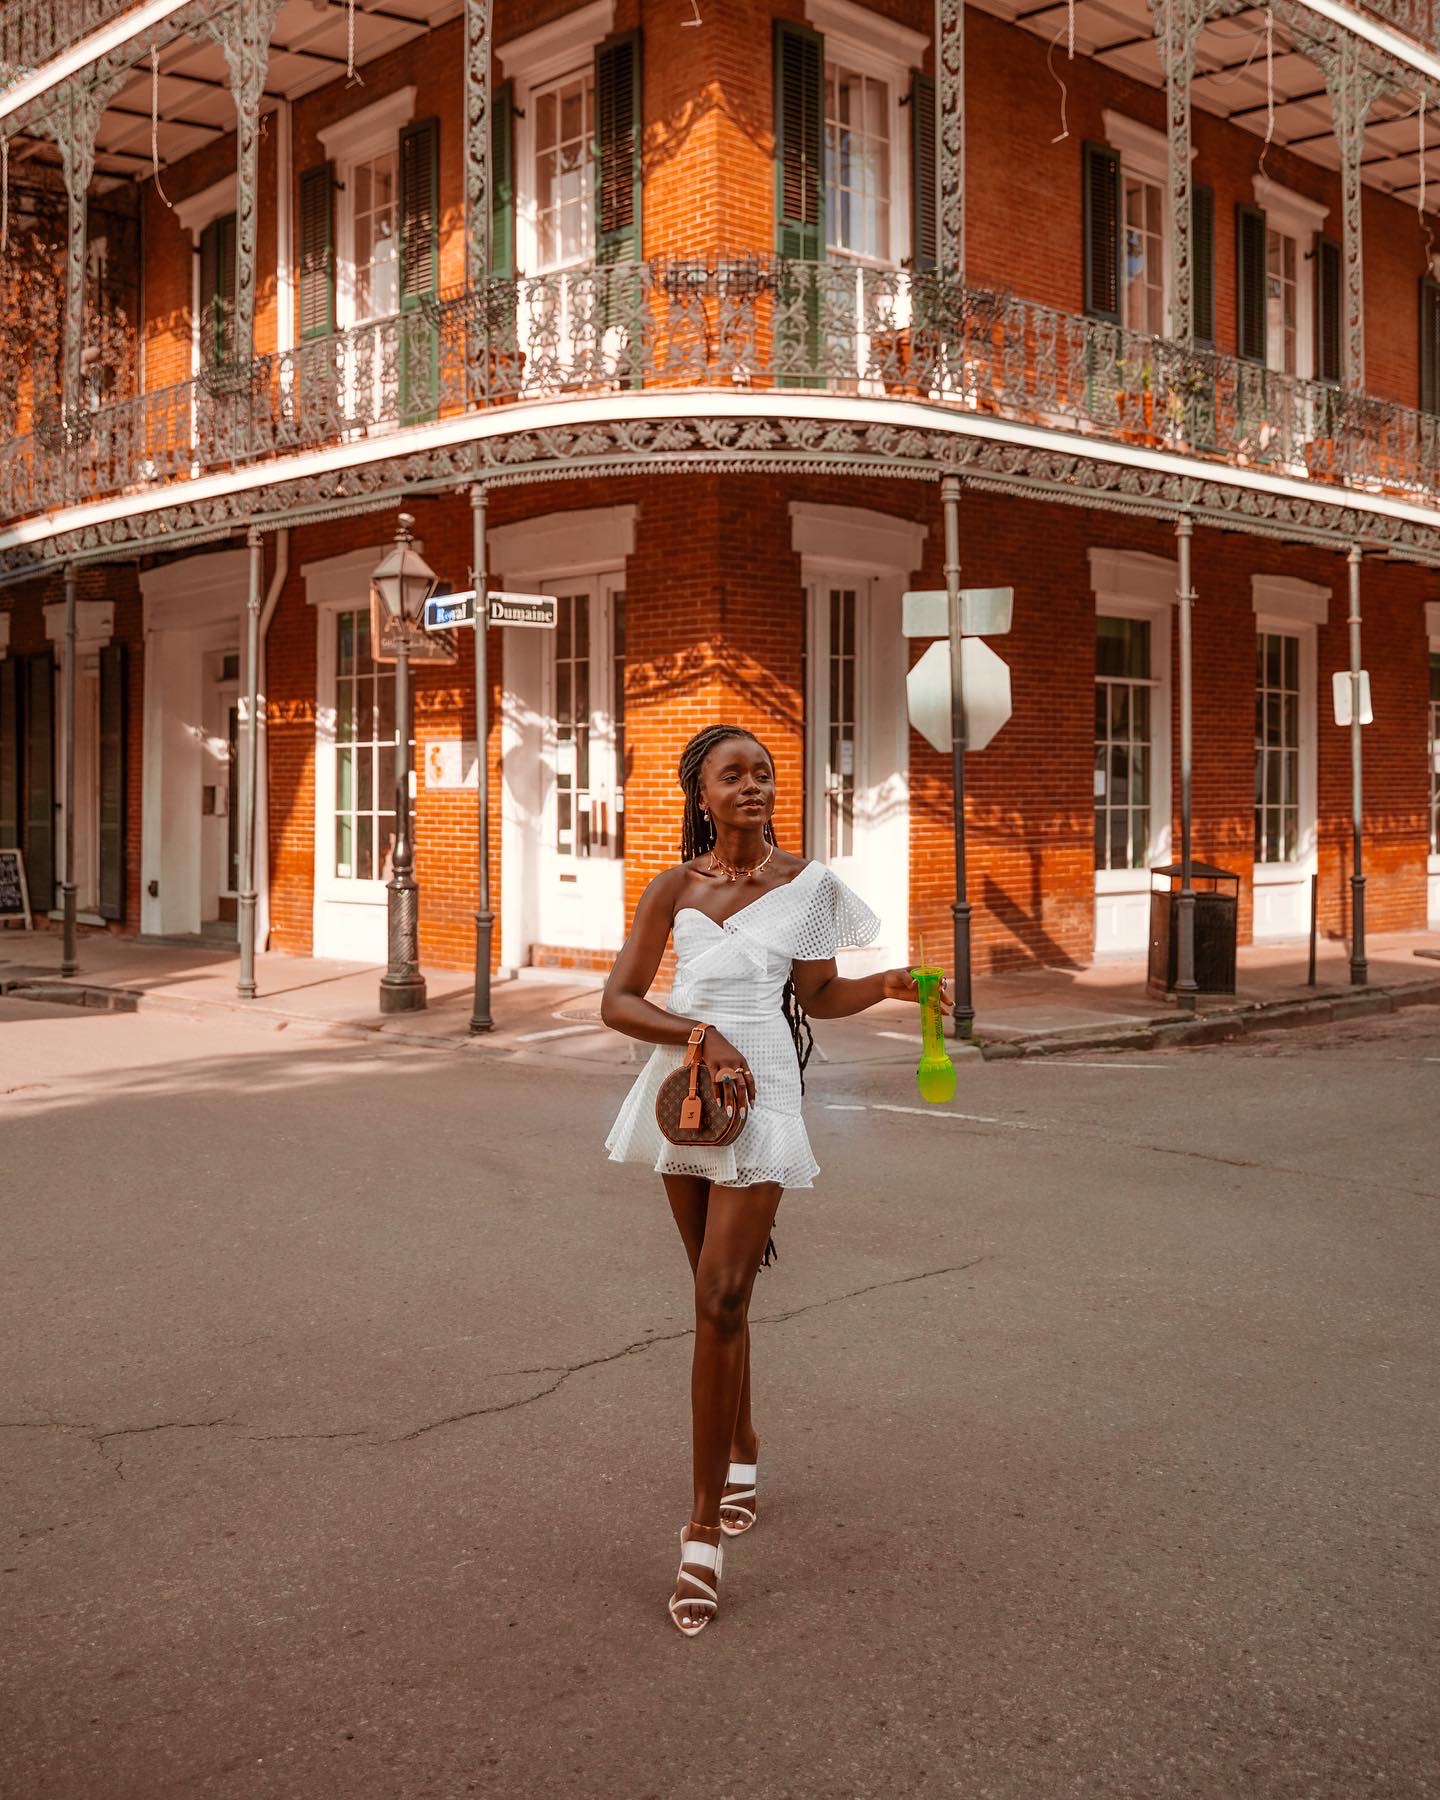 10 Best Things To Do In New Orleans